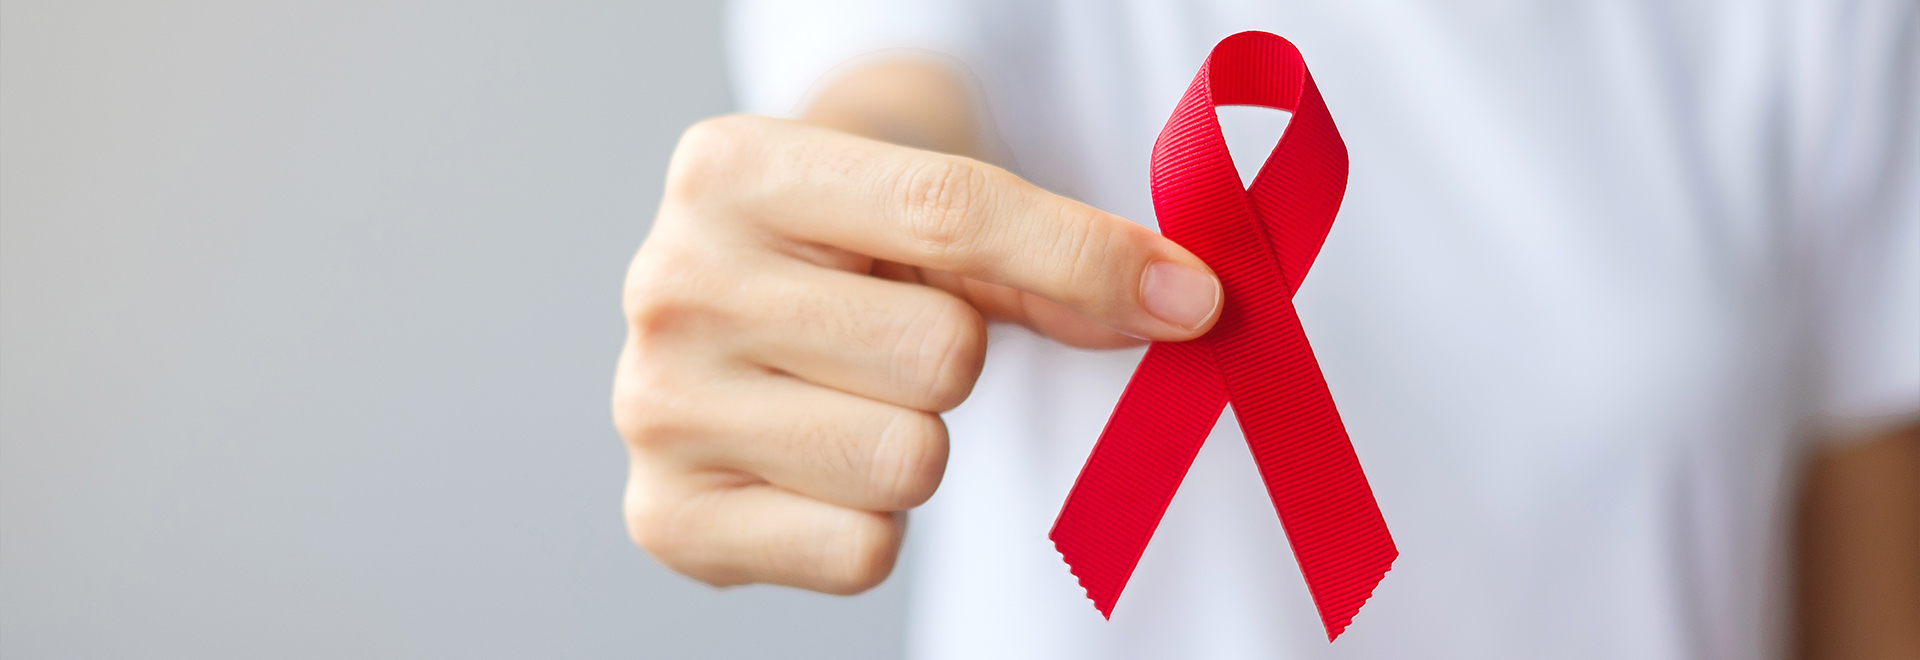 aids-myths-debunked-causes-symptoms-treatments-more